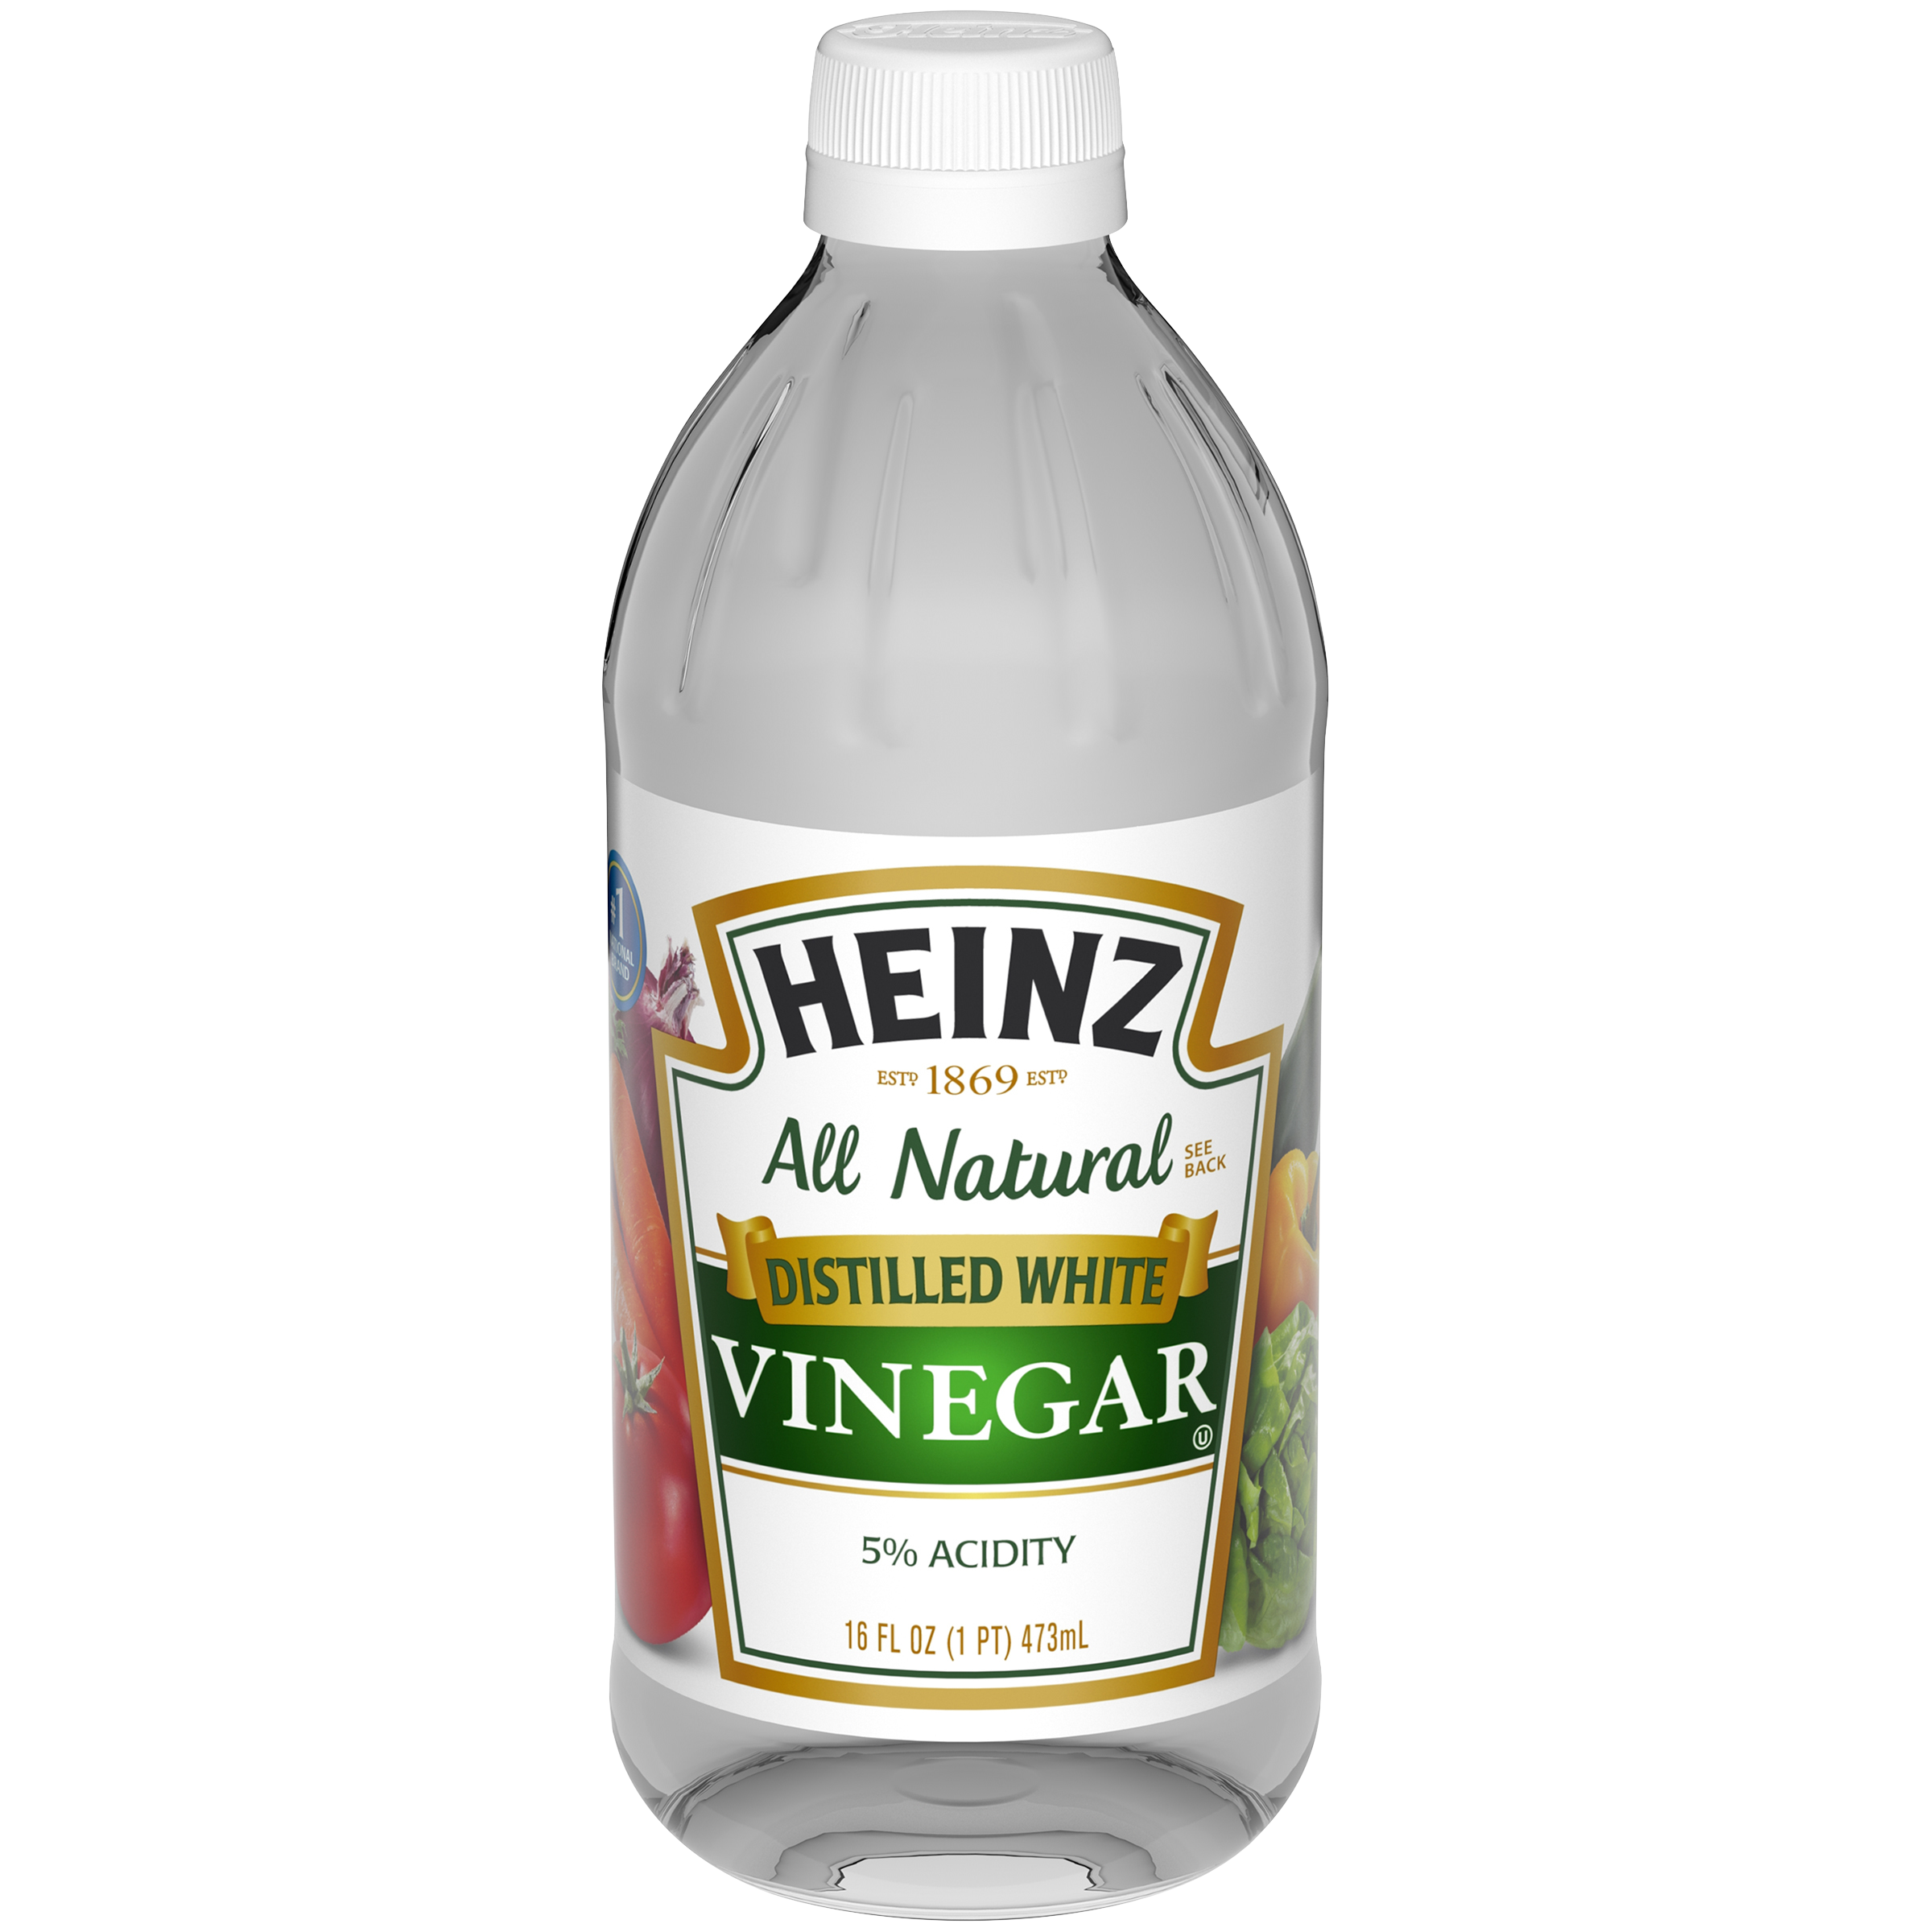 distilled-white-vinegar-with-5-acidity-products-heinz